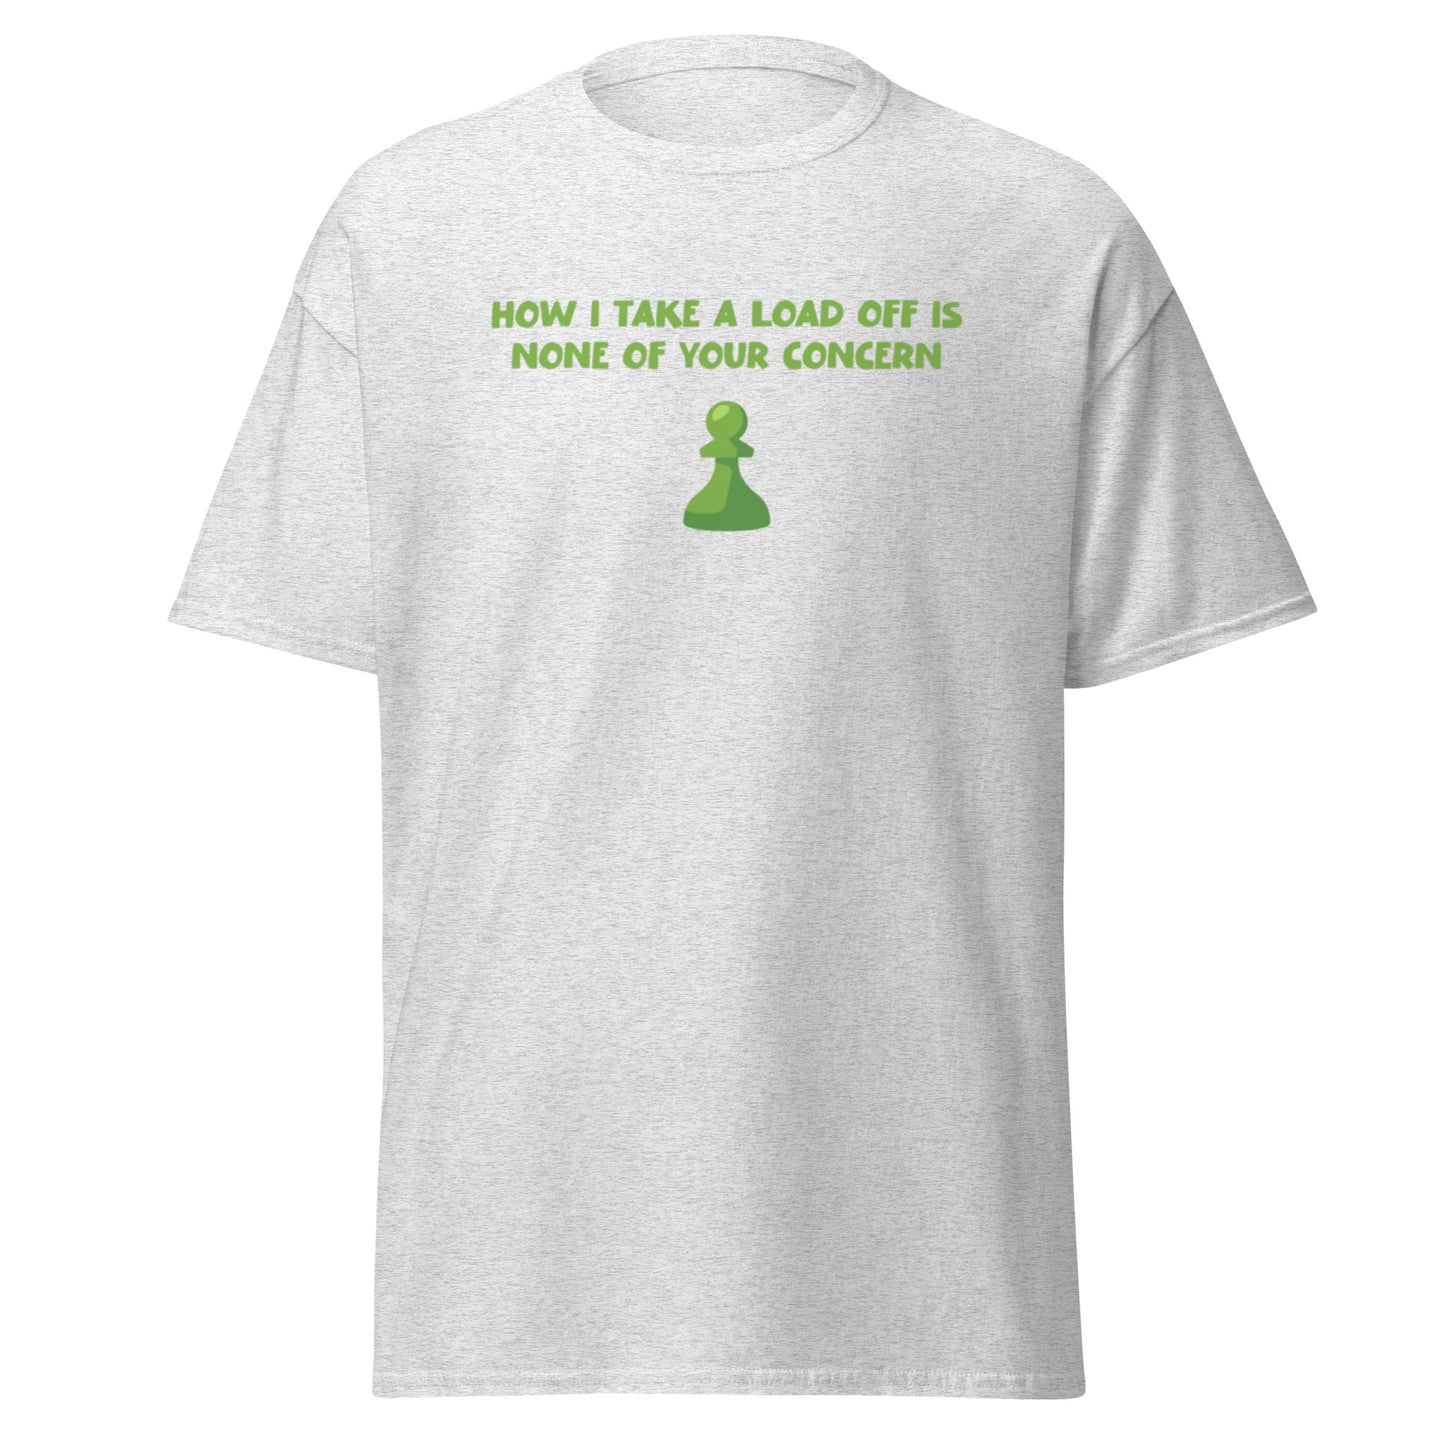 HOW I TAKE A LOAD OFF CHESS TEE